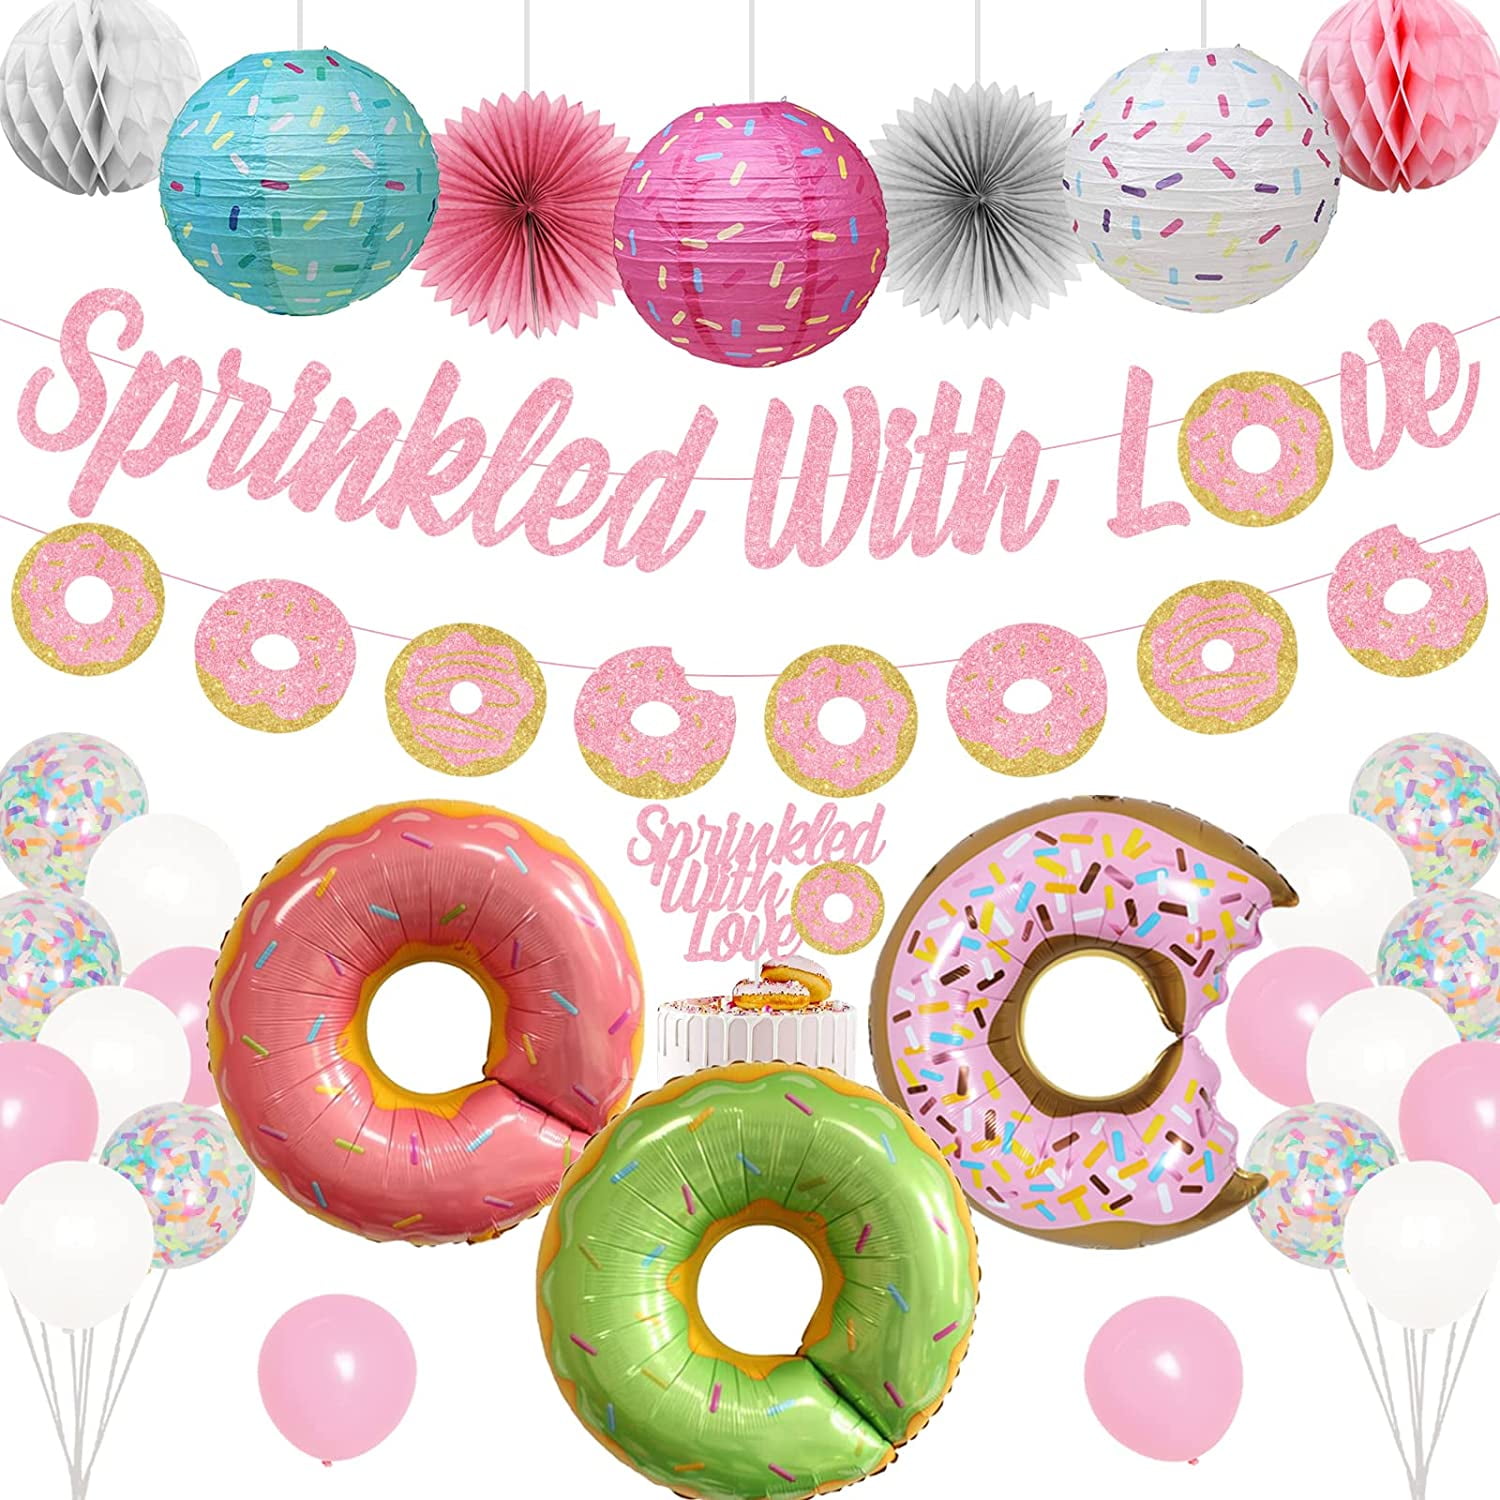 Funmemoir Blue Donut Baby Shower Decorations Sprinkled with Love Backdrop  Baby Sprinkle Balloon Garland Kit for